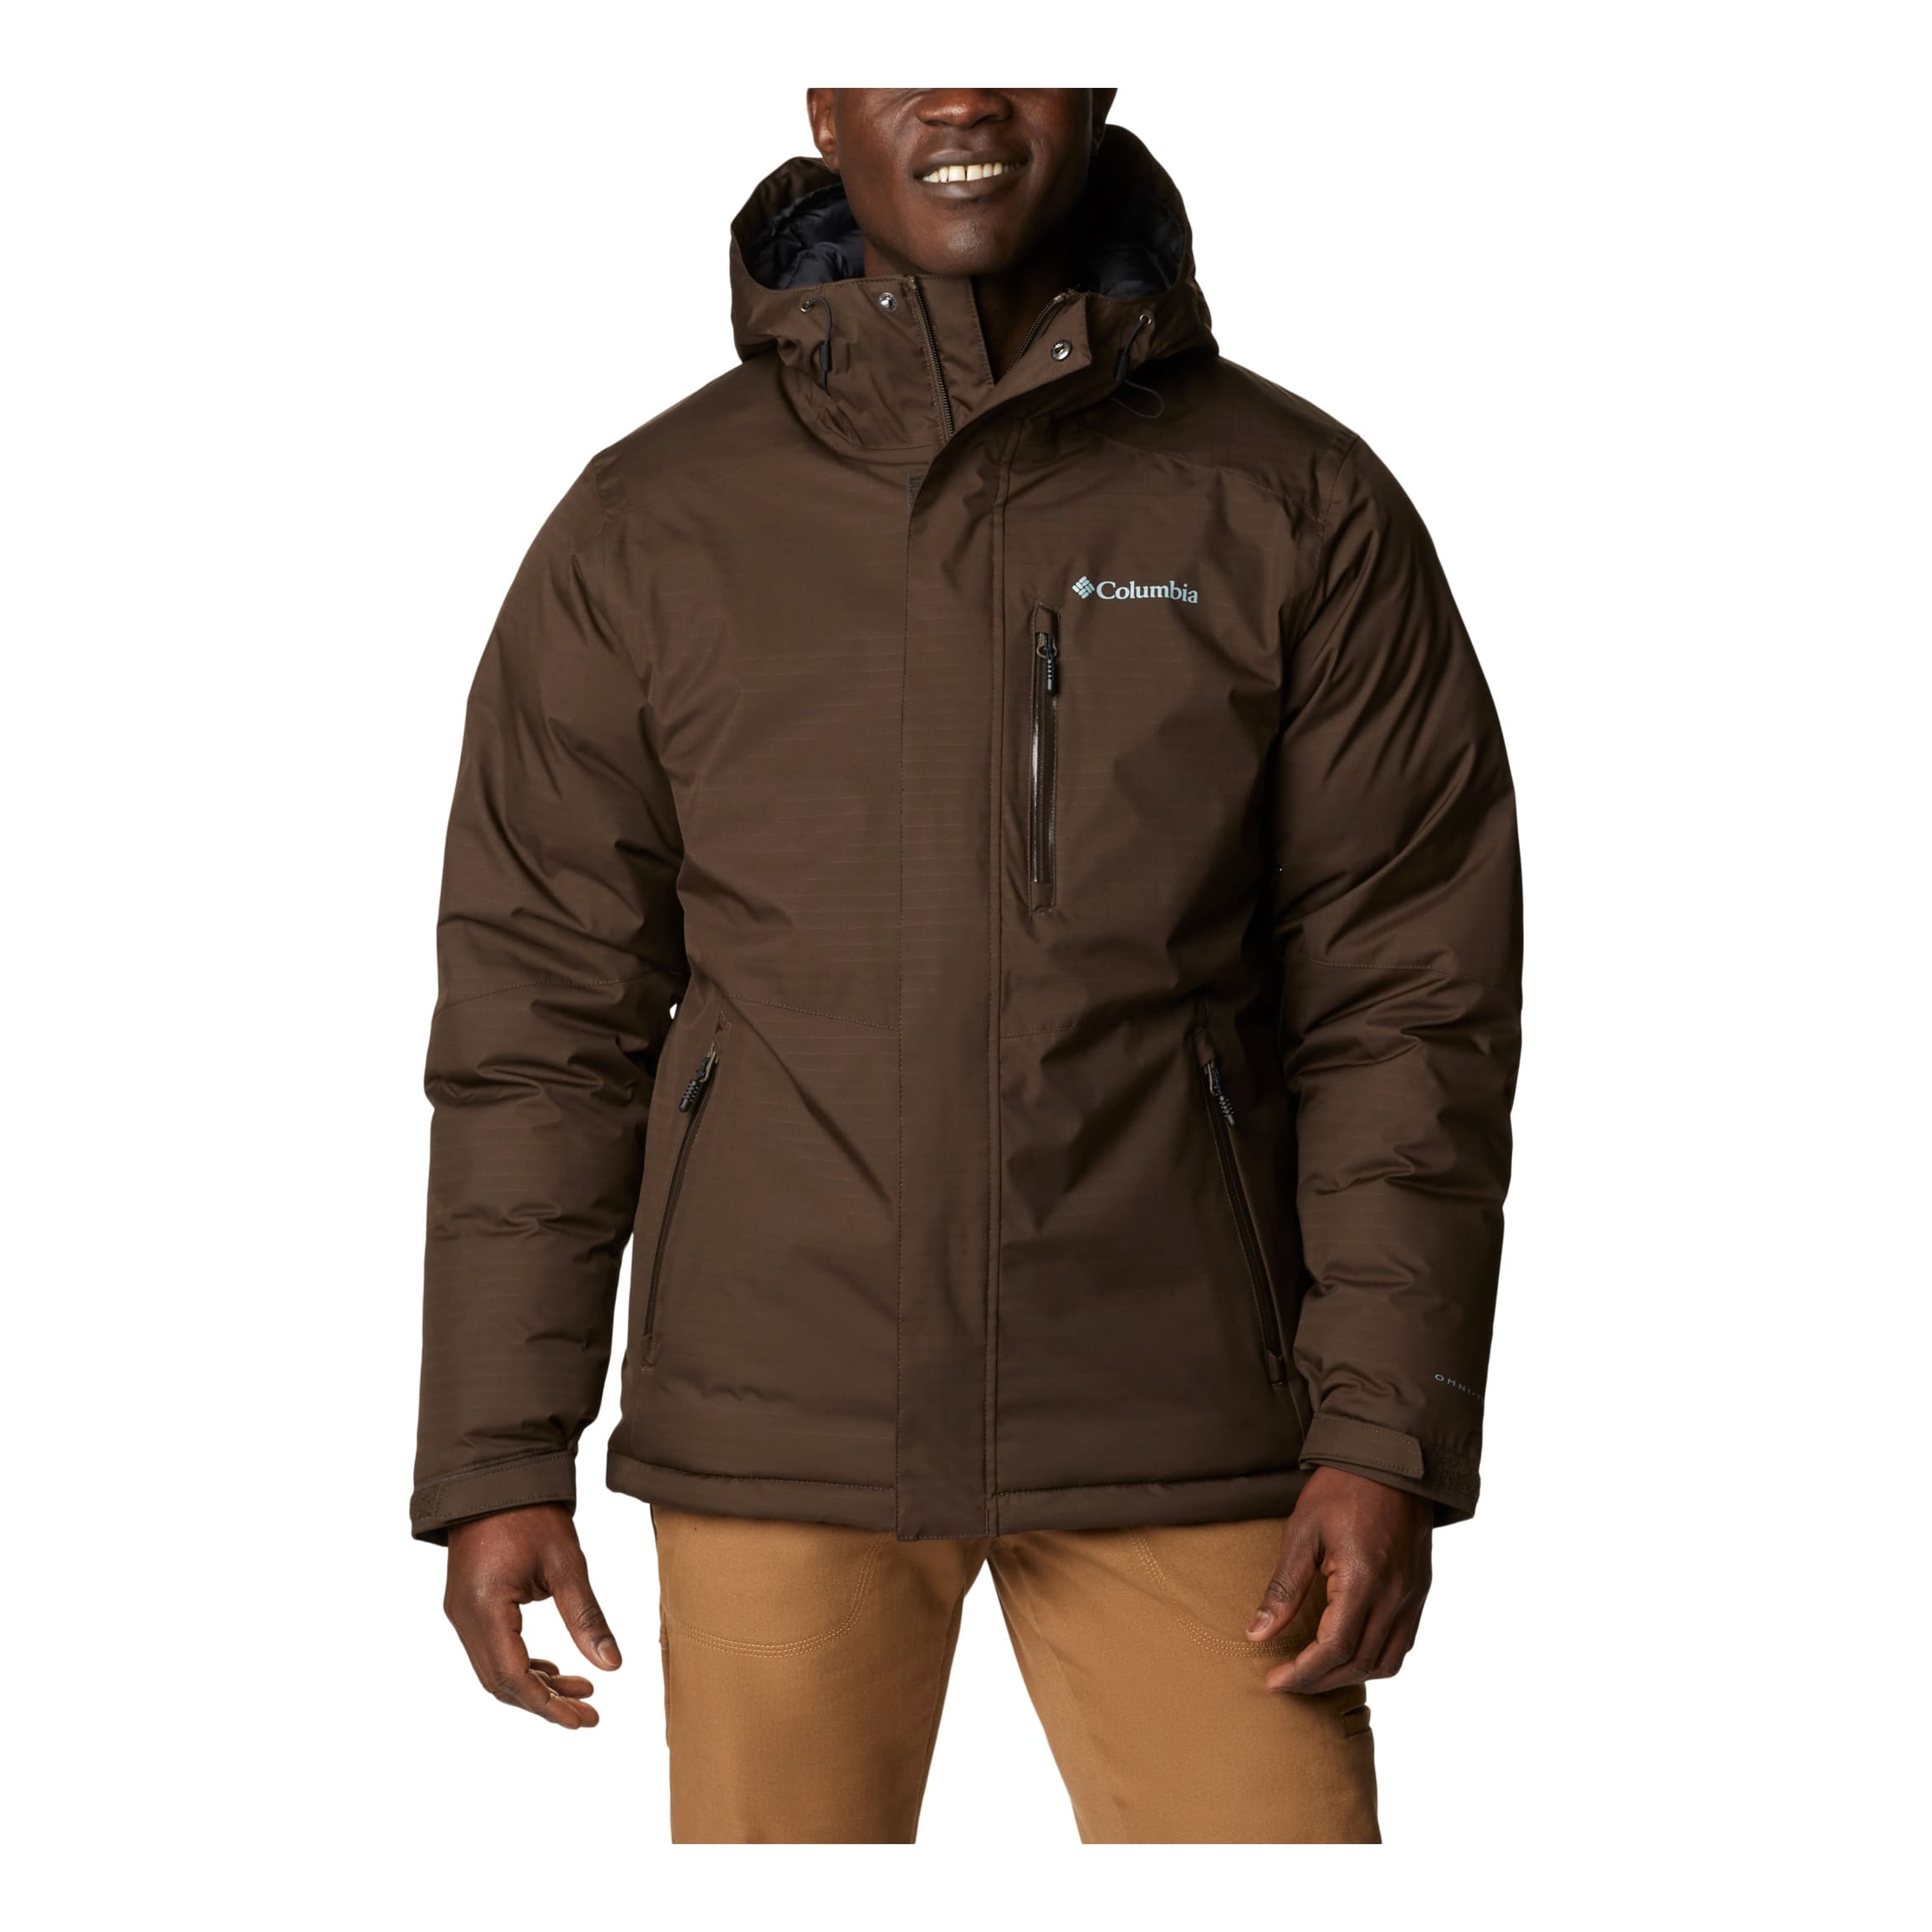 Guidewear Men's Xtreme Jacket with GORE-TEX